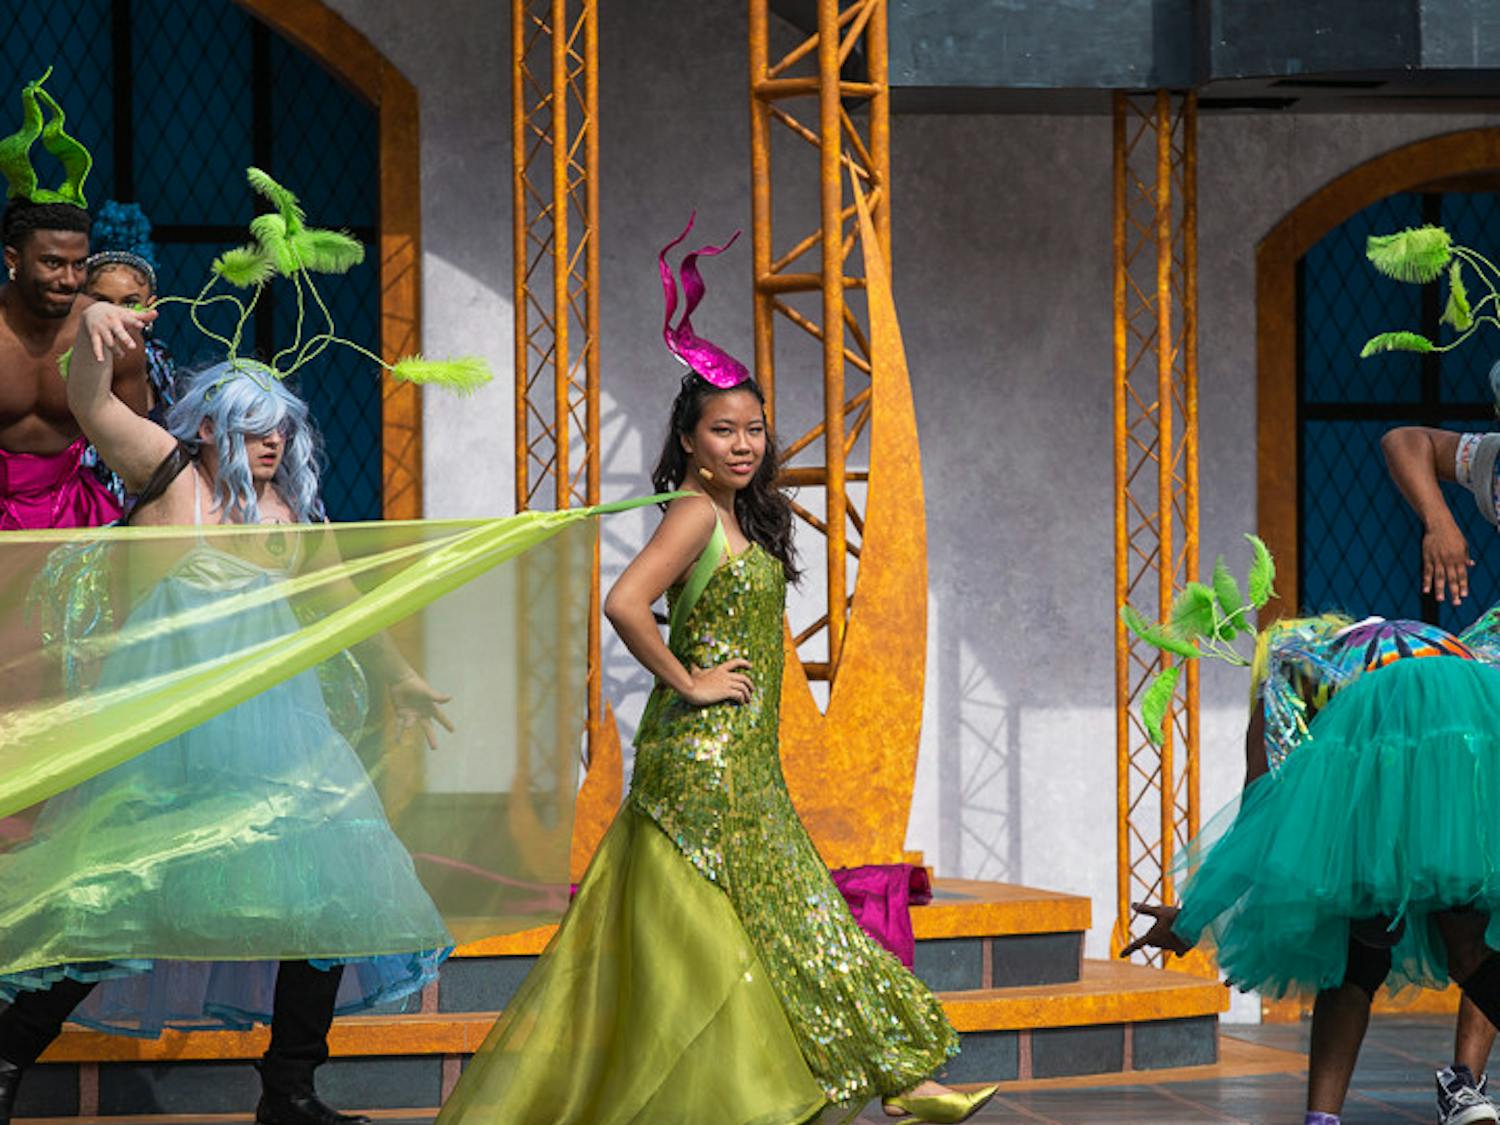 Titania, portrayed by fourth-year hospitality and tourism student Zoe Chan, walks across the stage during the beginning of "A Midsummer Night's Dream" on Oct. 9, 2022. &nbsp;USC Department of Theatre and Dance held the play from October 2 to 9, 2022.&nbsp;